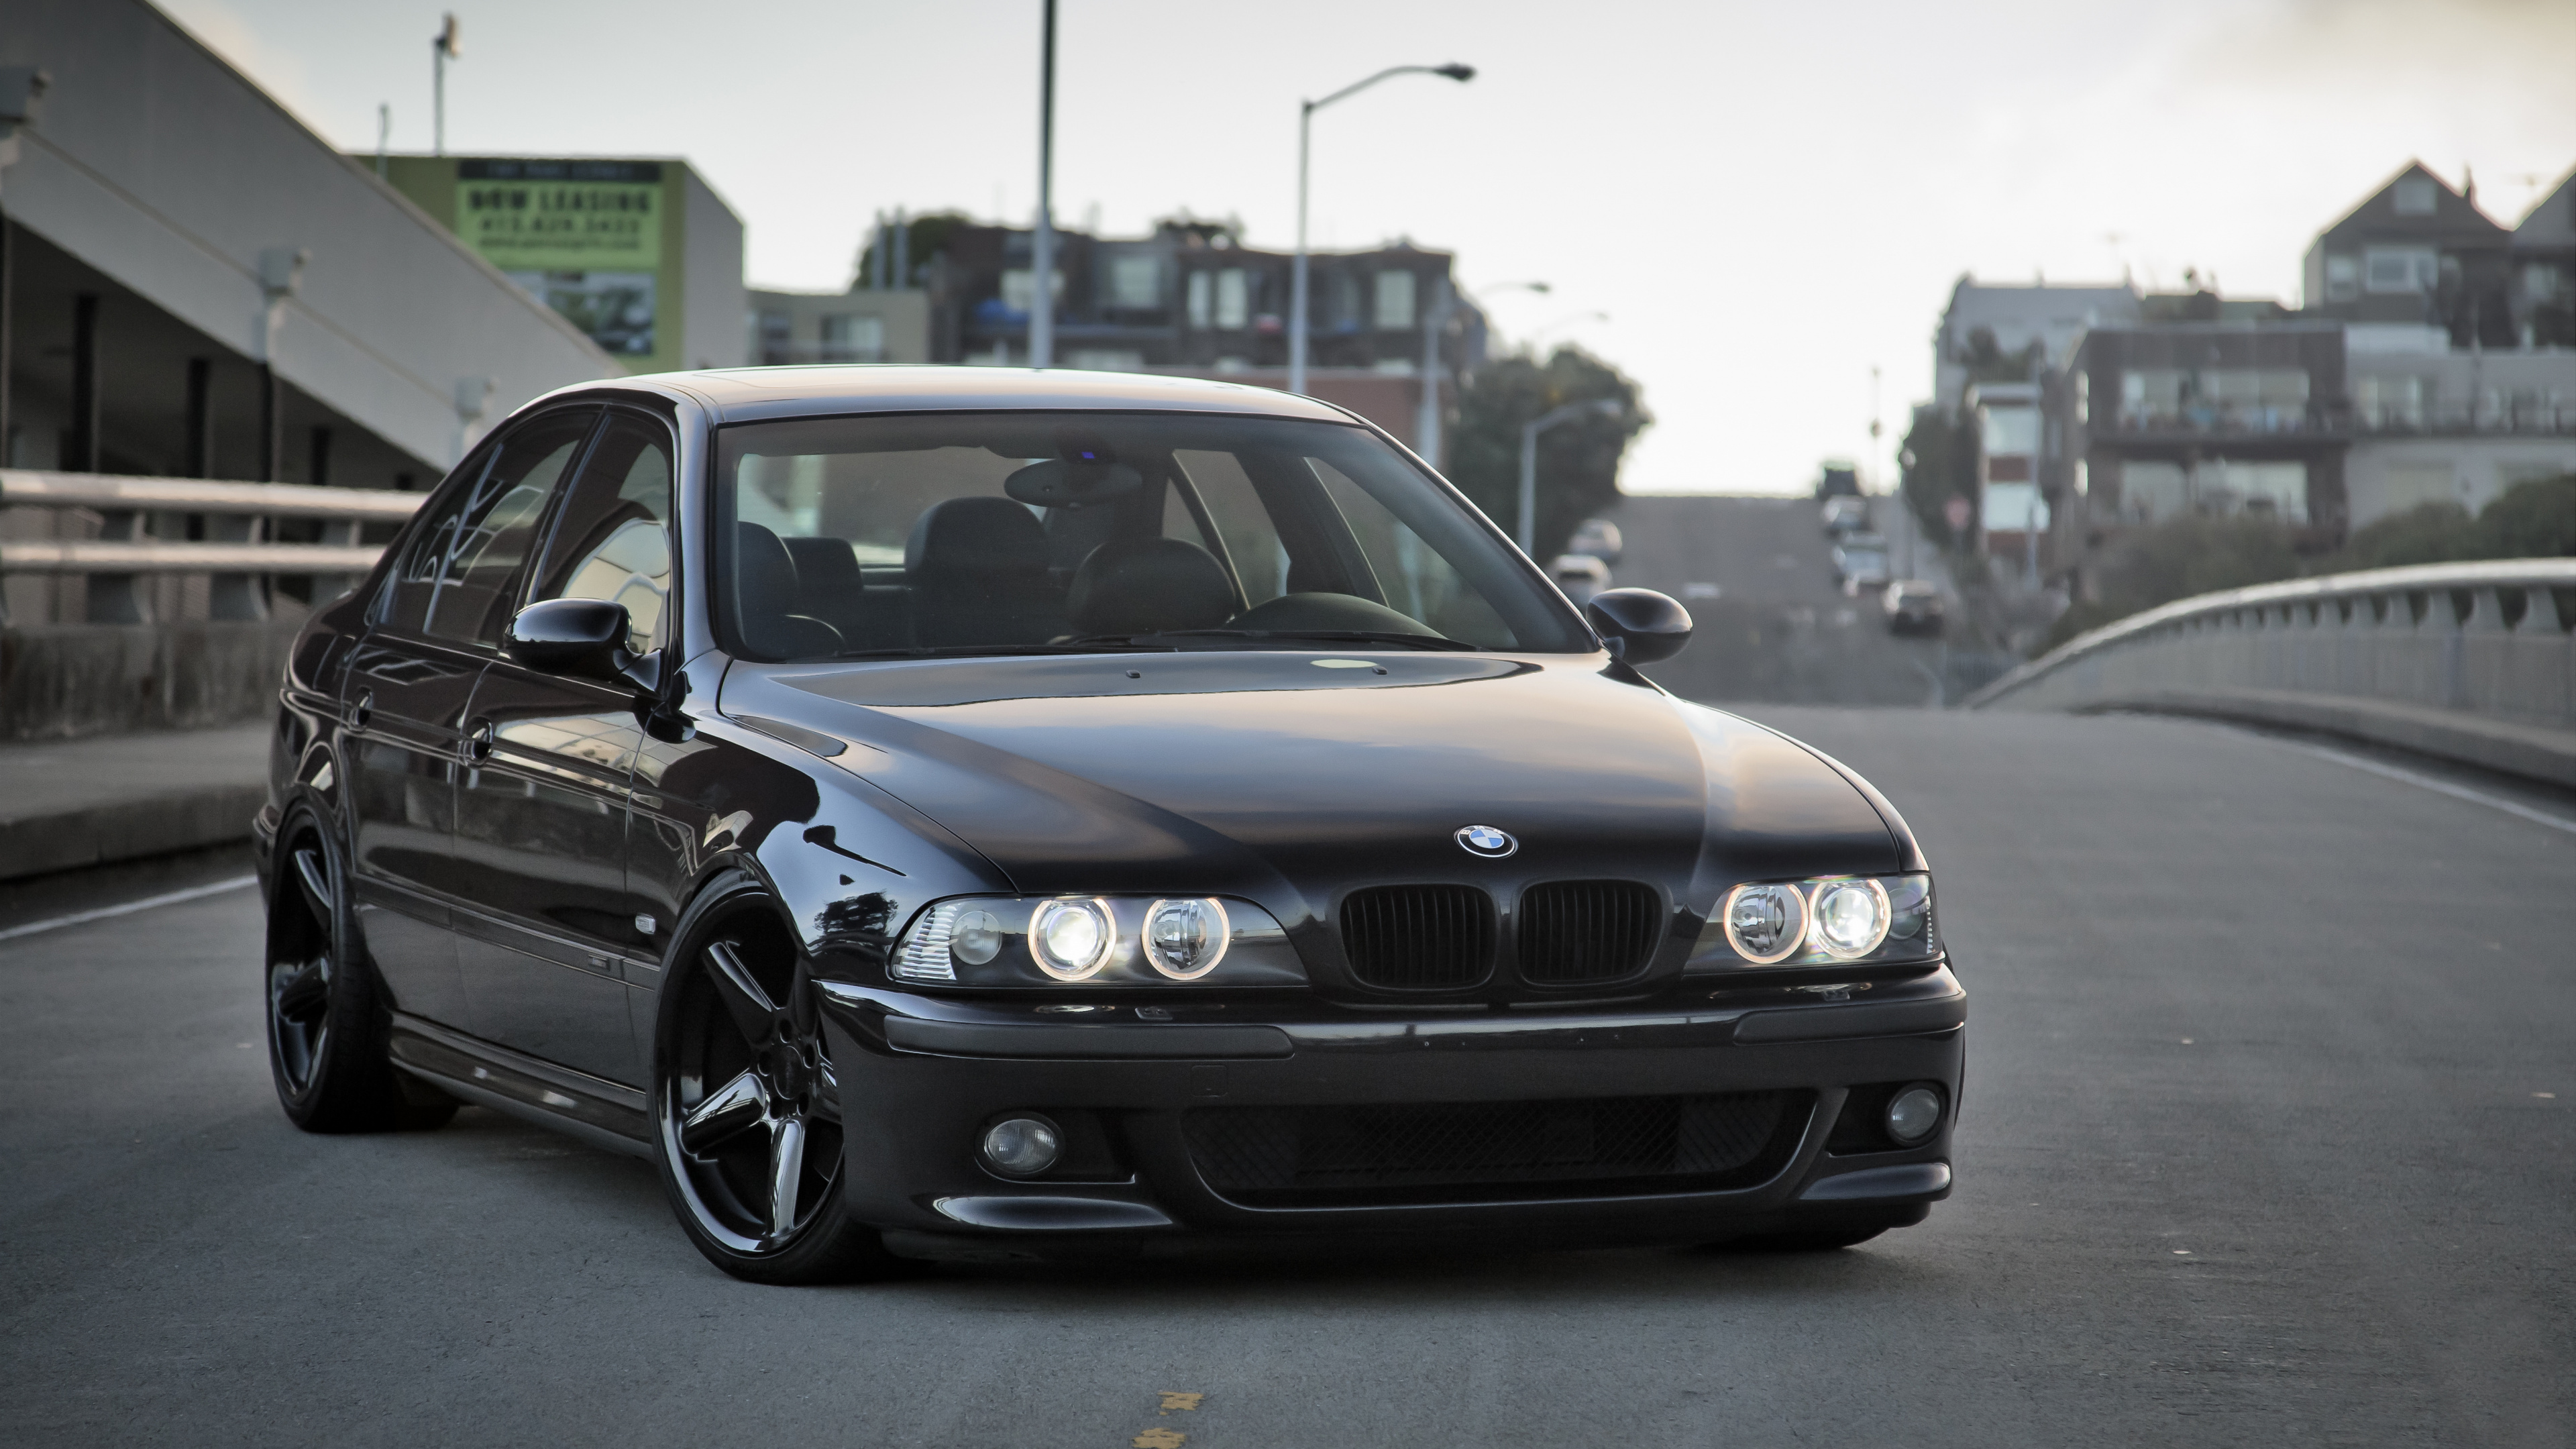 Black Bmw m 3 on Road During Daytime. Wallpaper in 3840x2160 Resolution